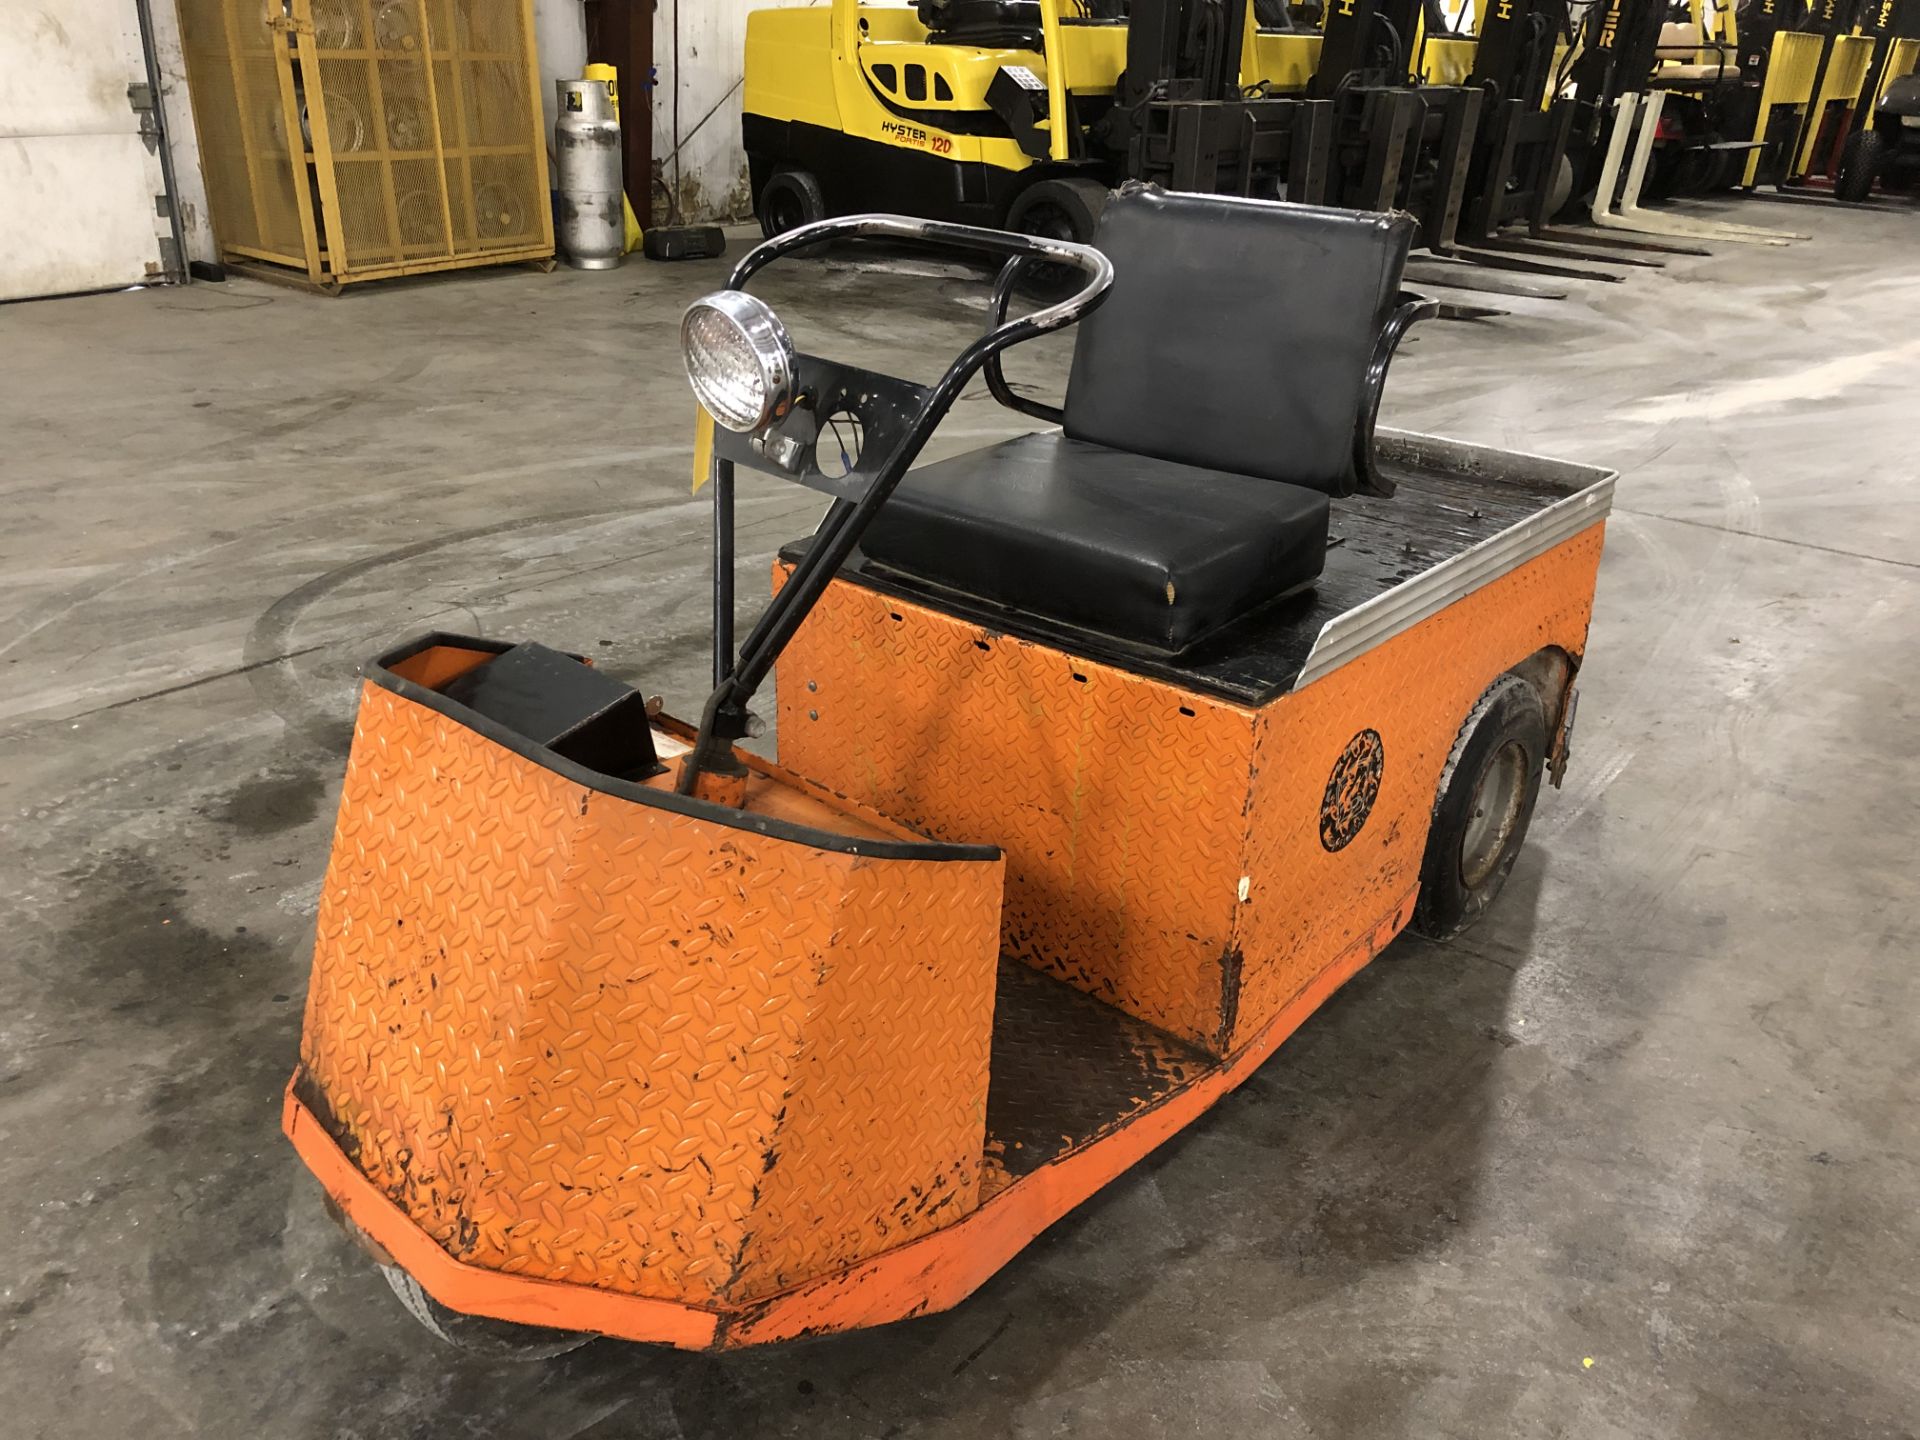 TAYLOR-DUNN ELECTRIC 3-WHEEL PERSONNEL CART, MODEL: S85-34, S/N: 39653, 24 VOLT, ON-BOARD CHARGER, - Image 4 of 7